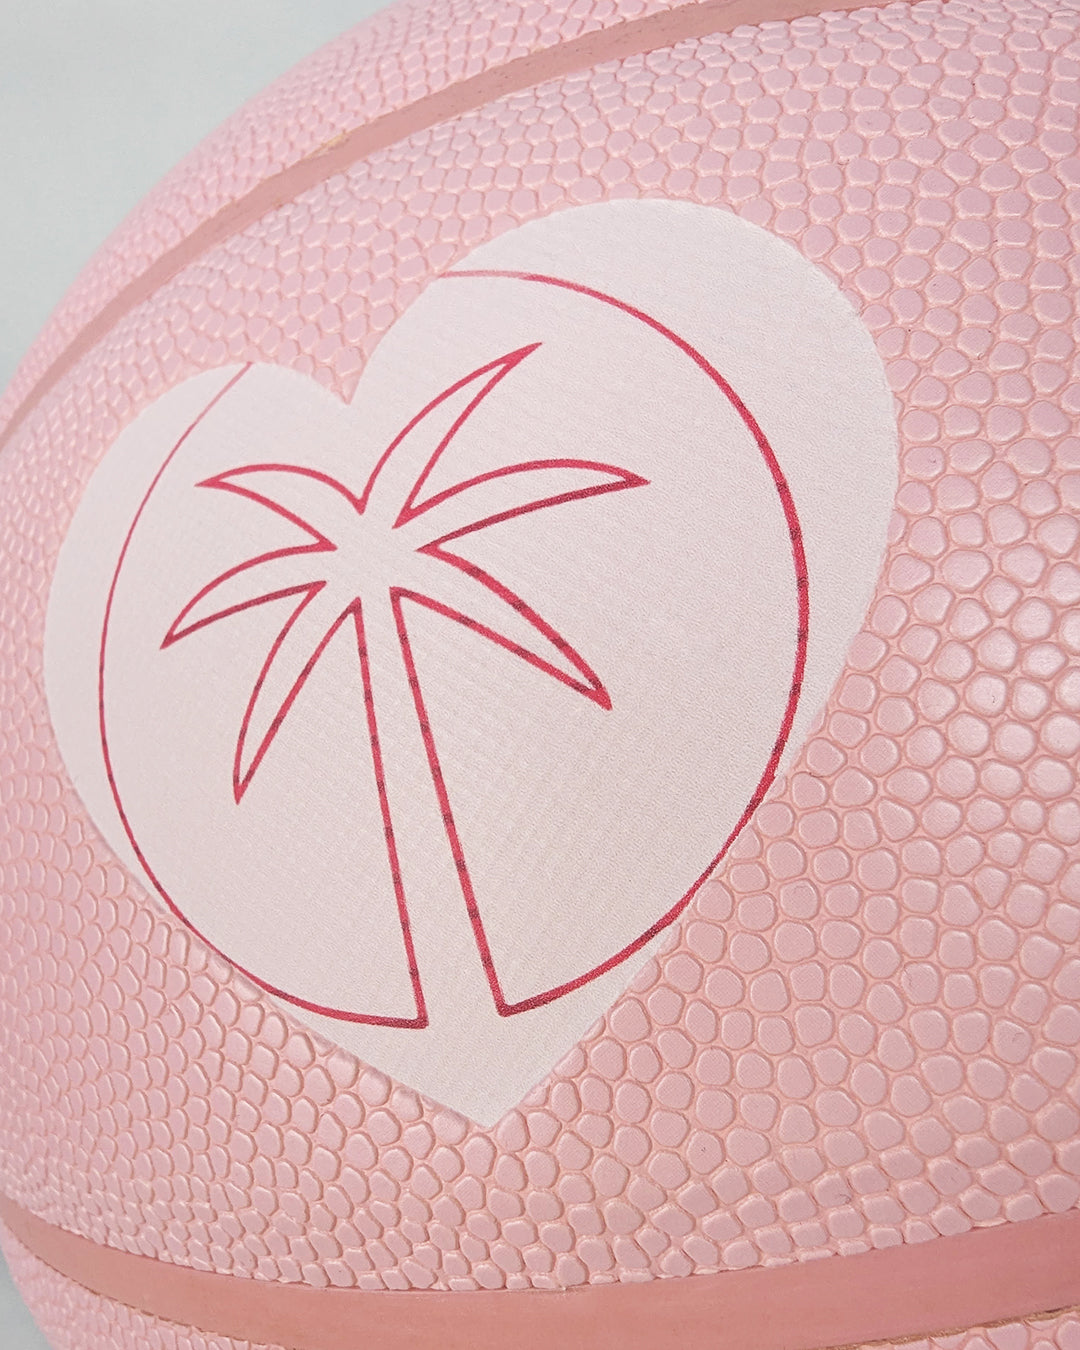 Limited Edition "Pink Ball"